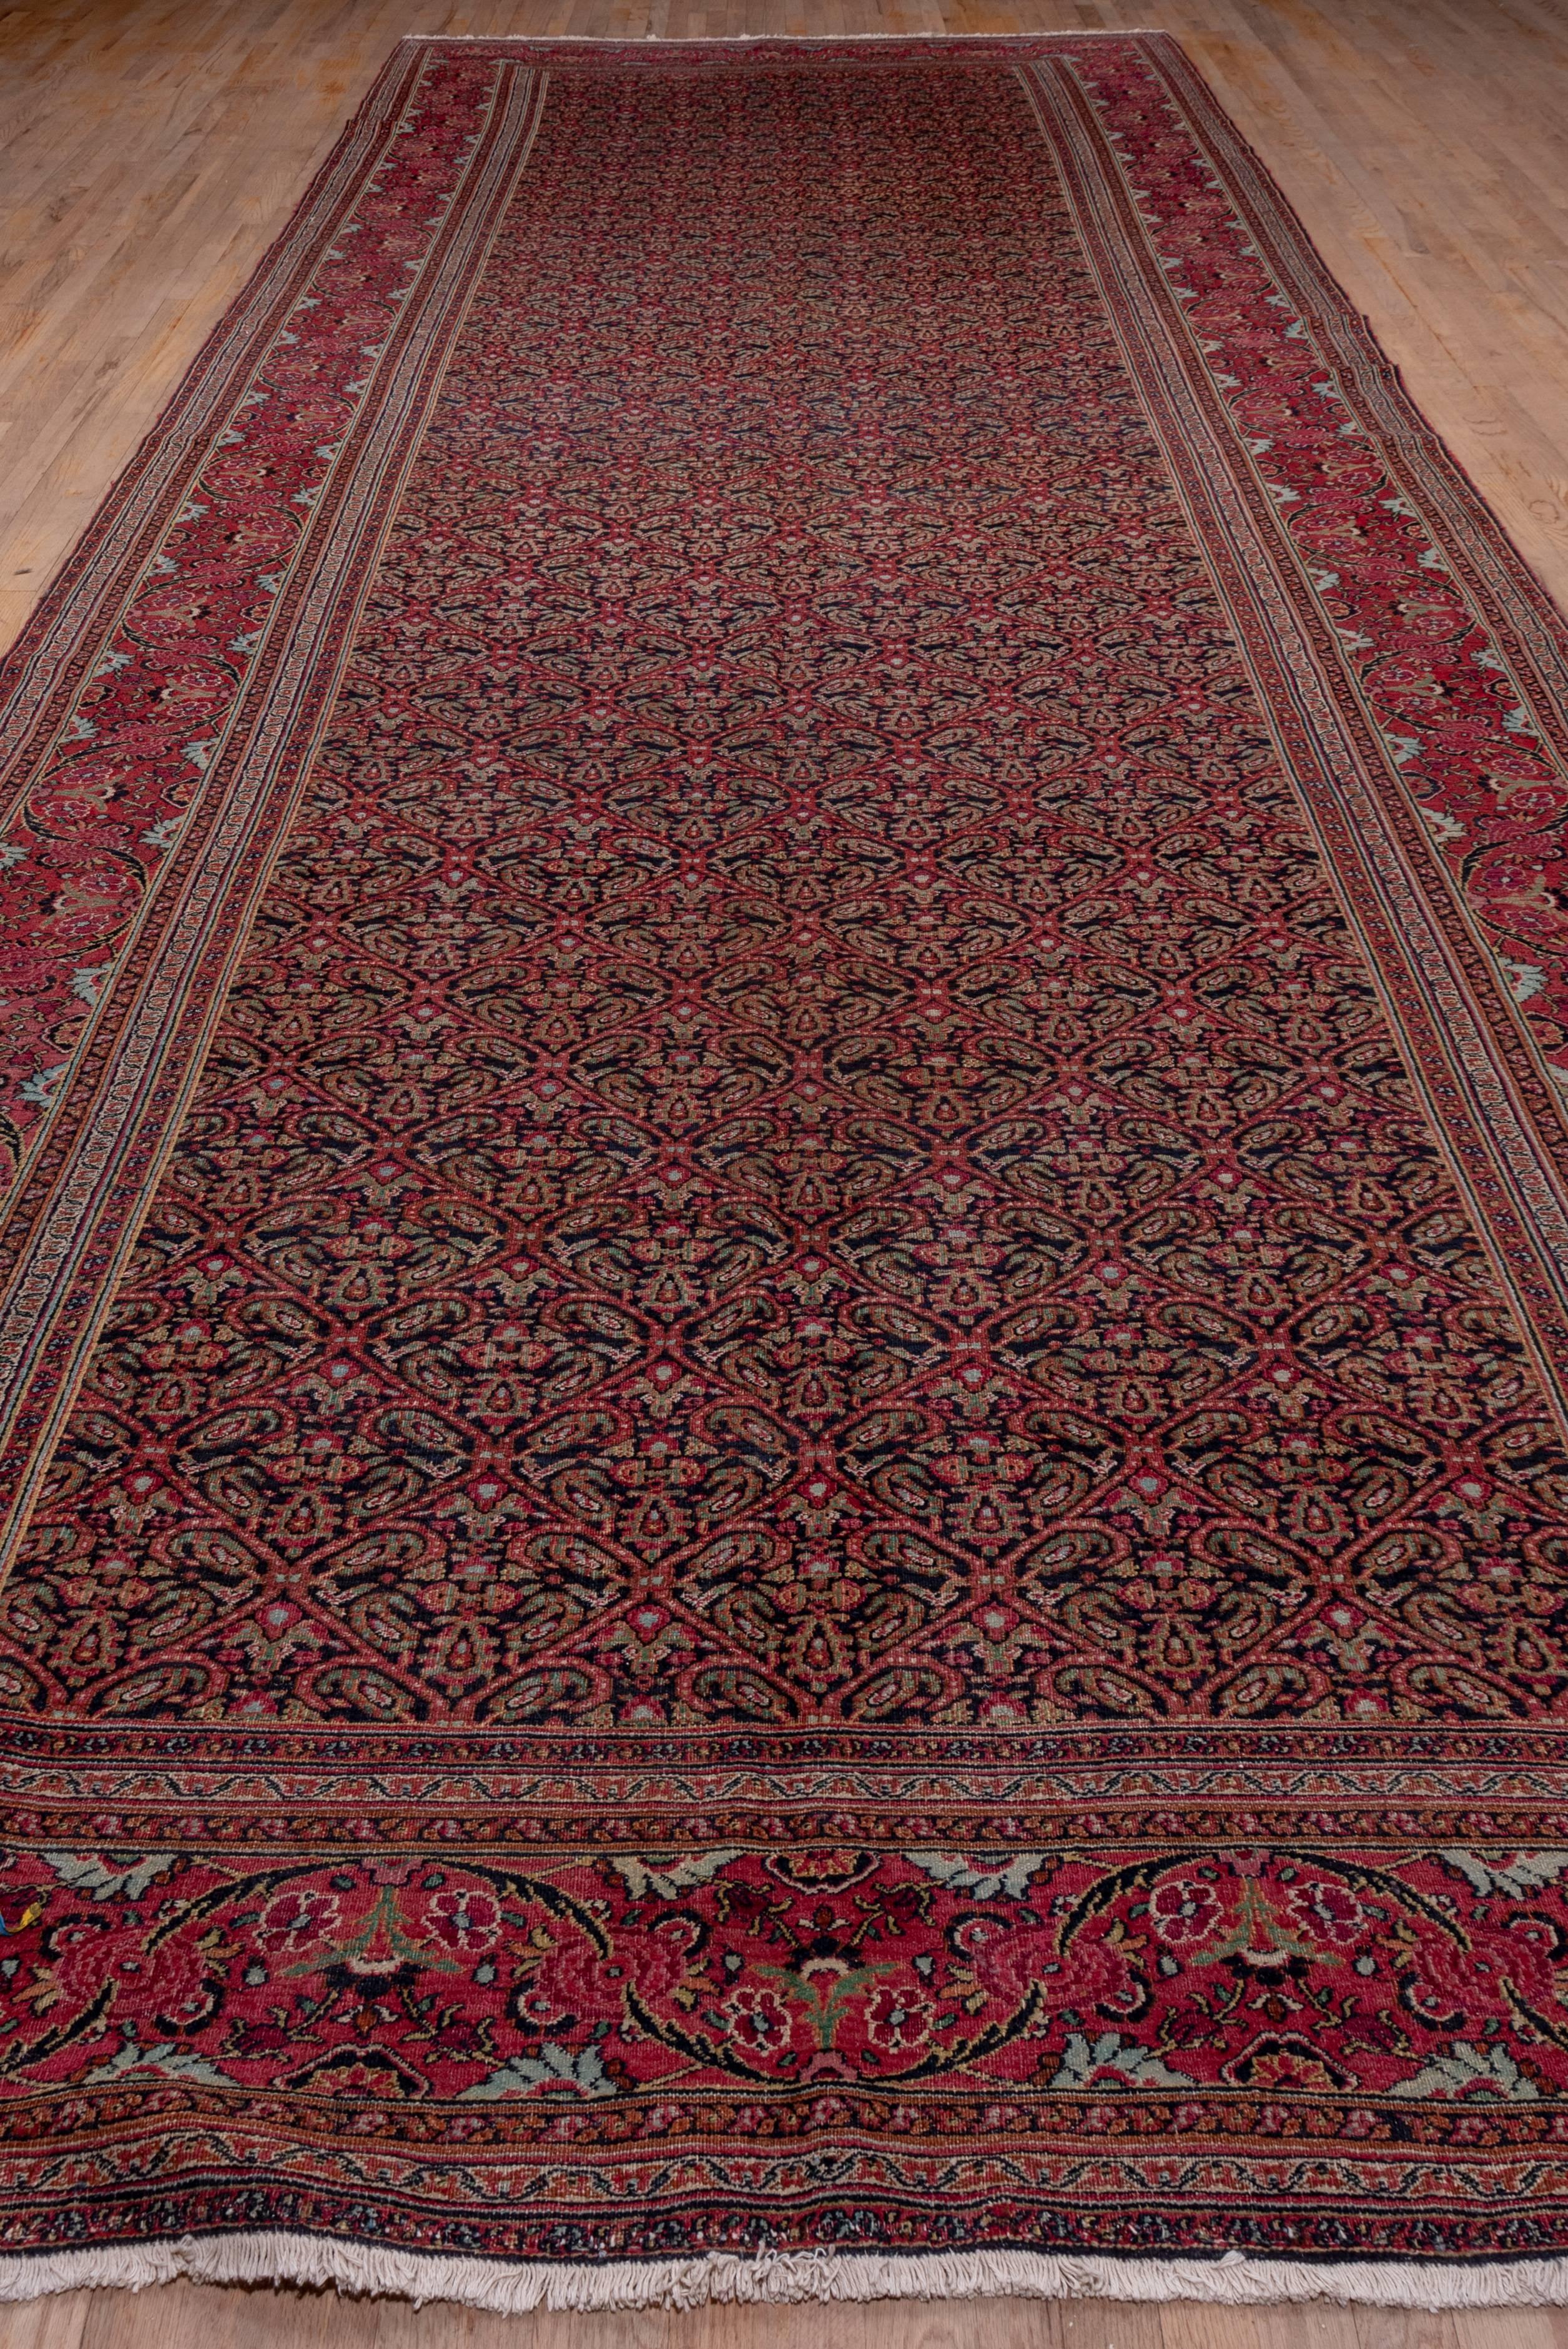 Persian Antique Khorassan Carpet, Red Field In Excellent Condition For Sale In New York, NY